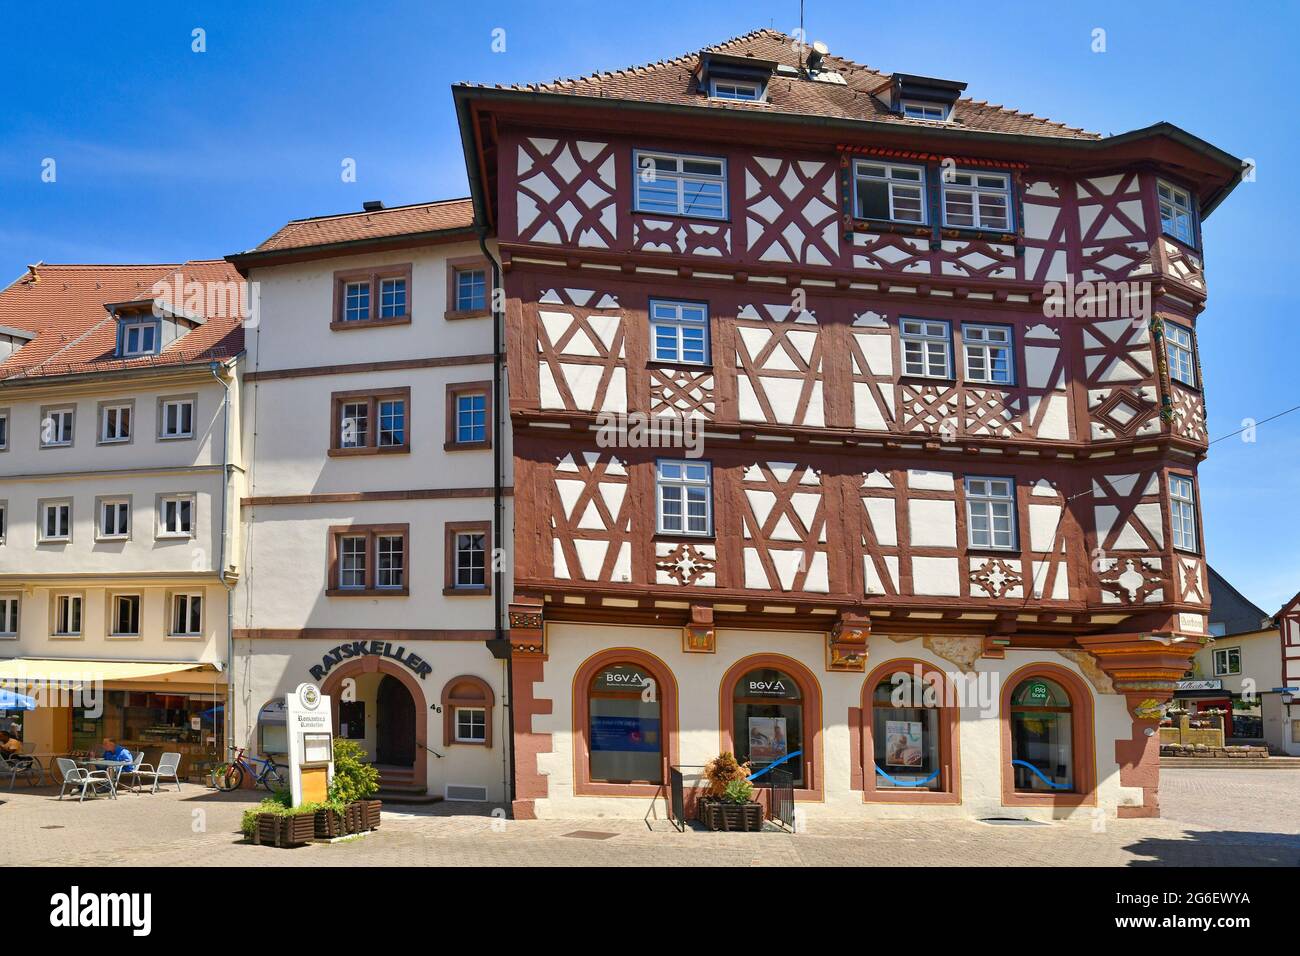 Mosbach, Germany - June 2021: Historic town center with timber-framed houses called 'Palmsche Haus' Stock Photo